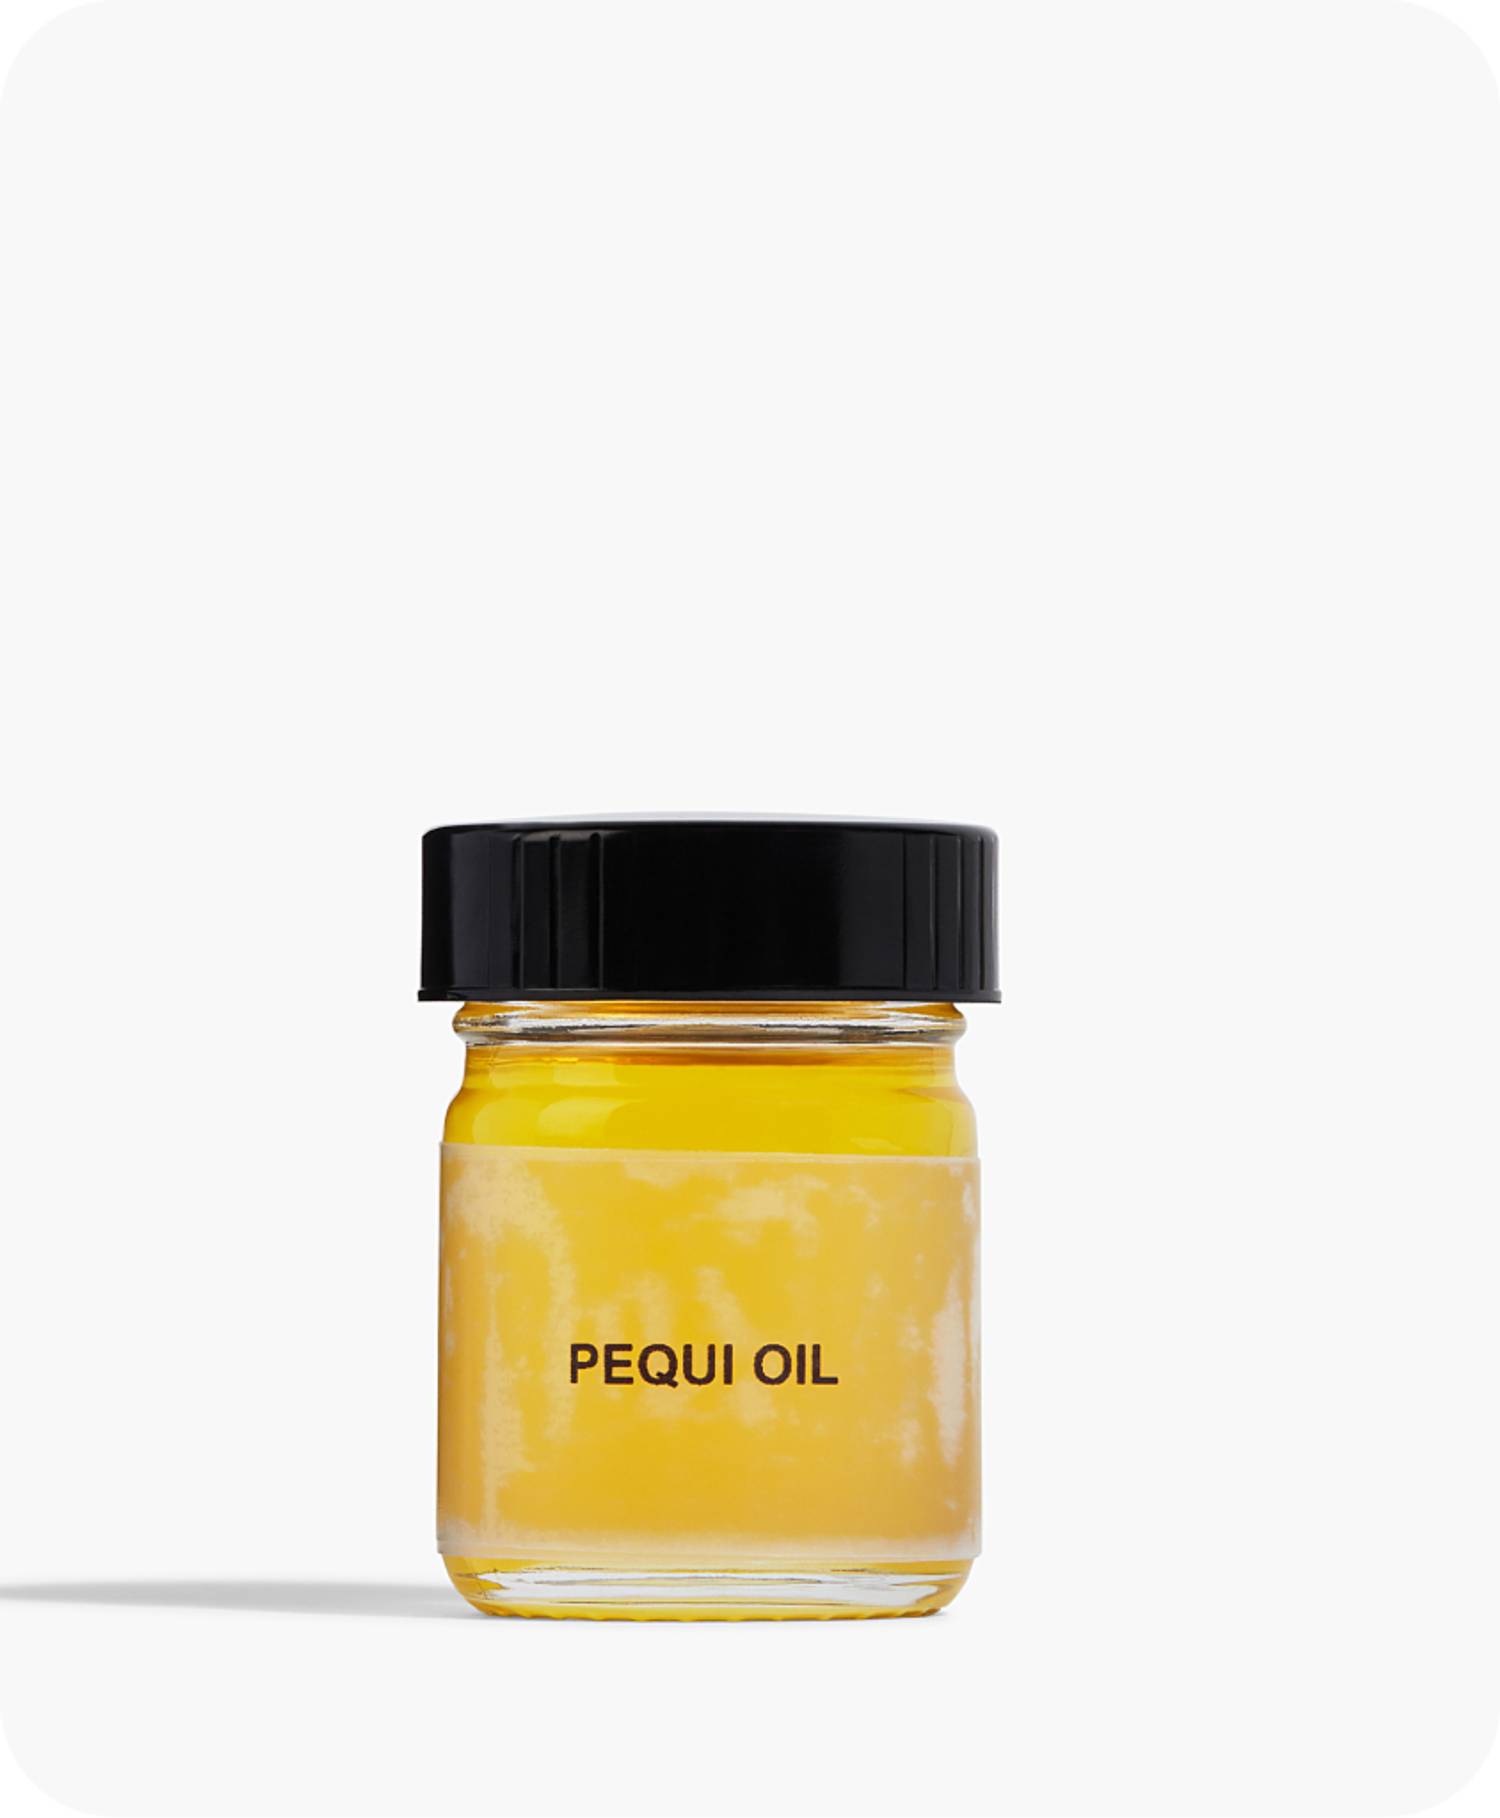 Pequi Seed Oil in natural form